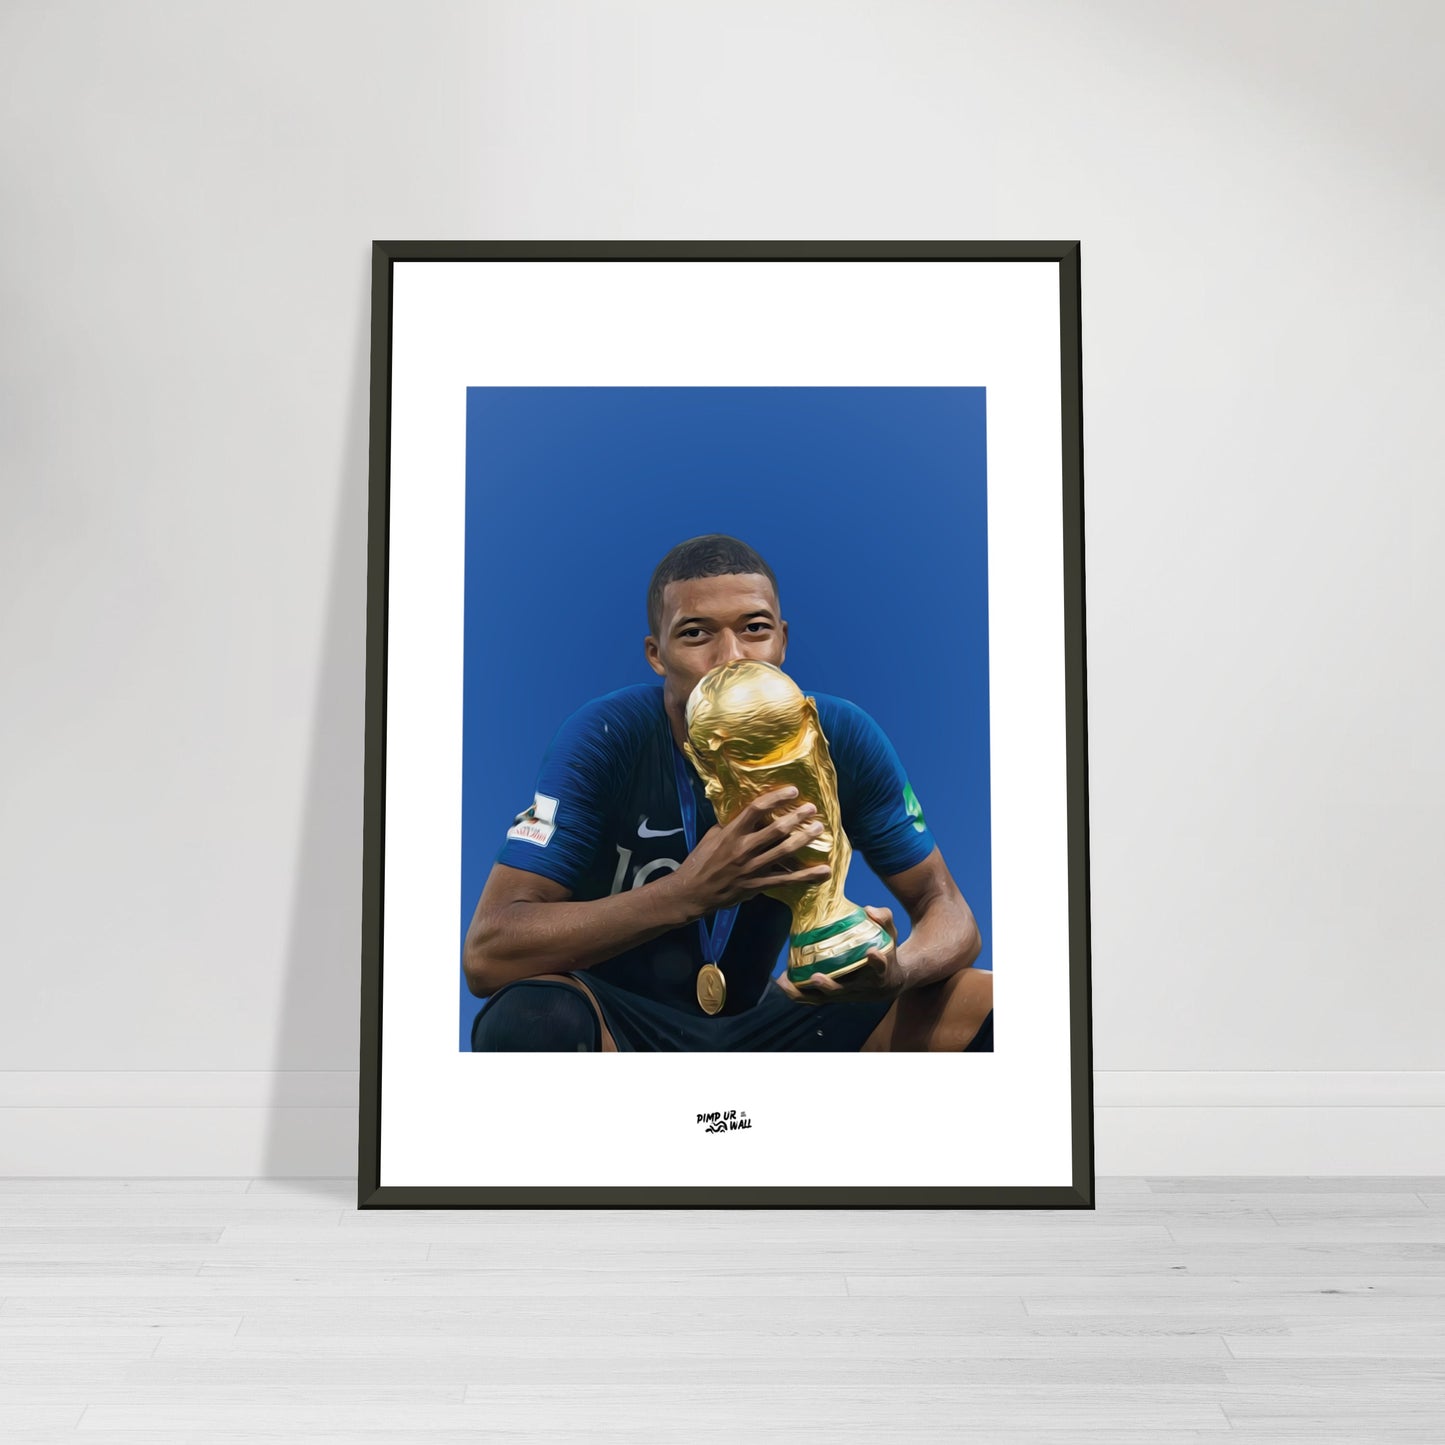 Kylian Mbappe with the trophy after winning the 2018 World Cup